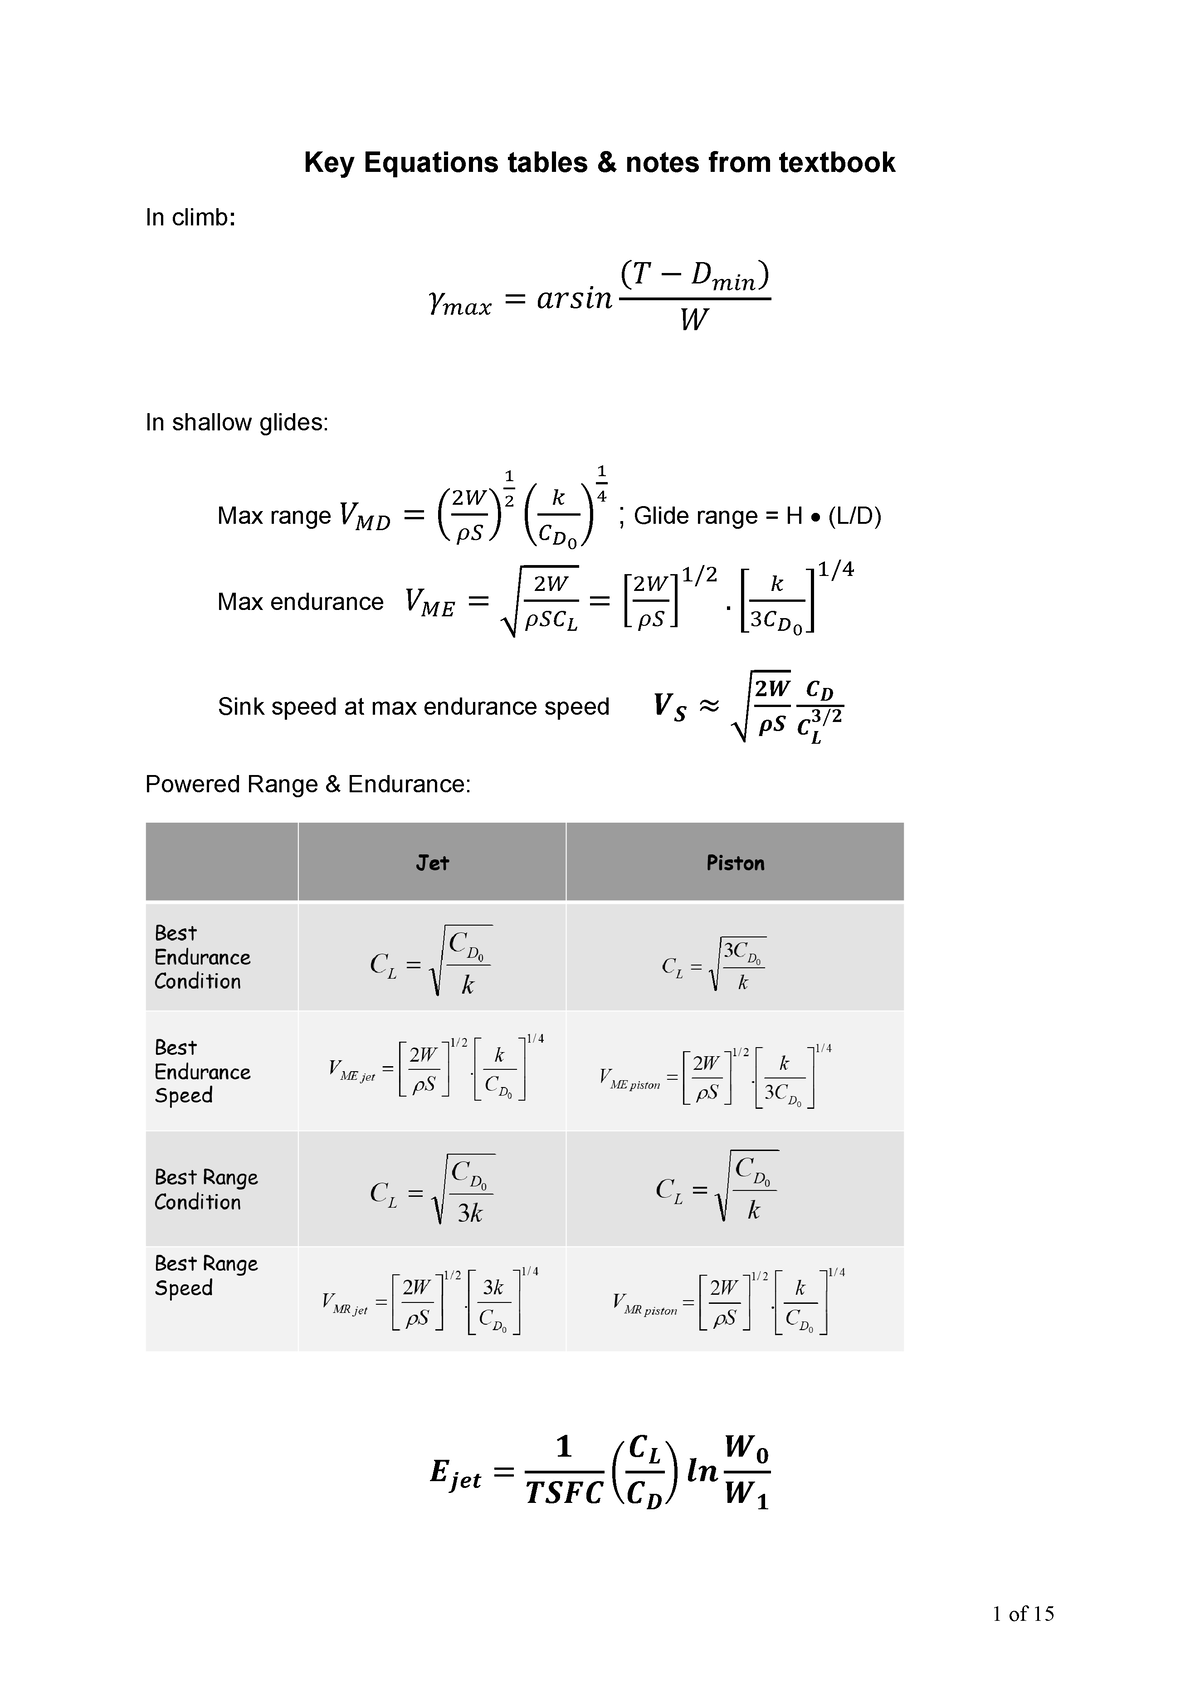 formula-sheet-test-and-exam-key-equations-tables-notes-from